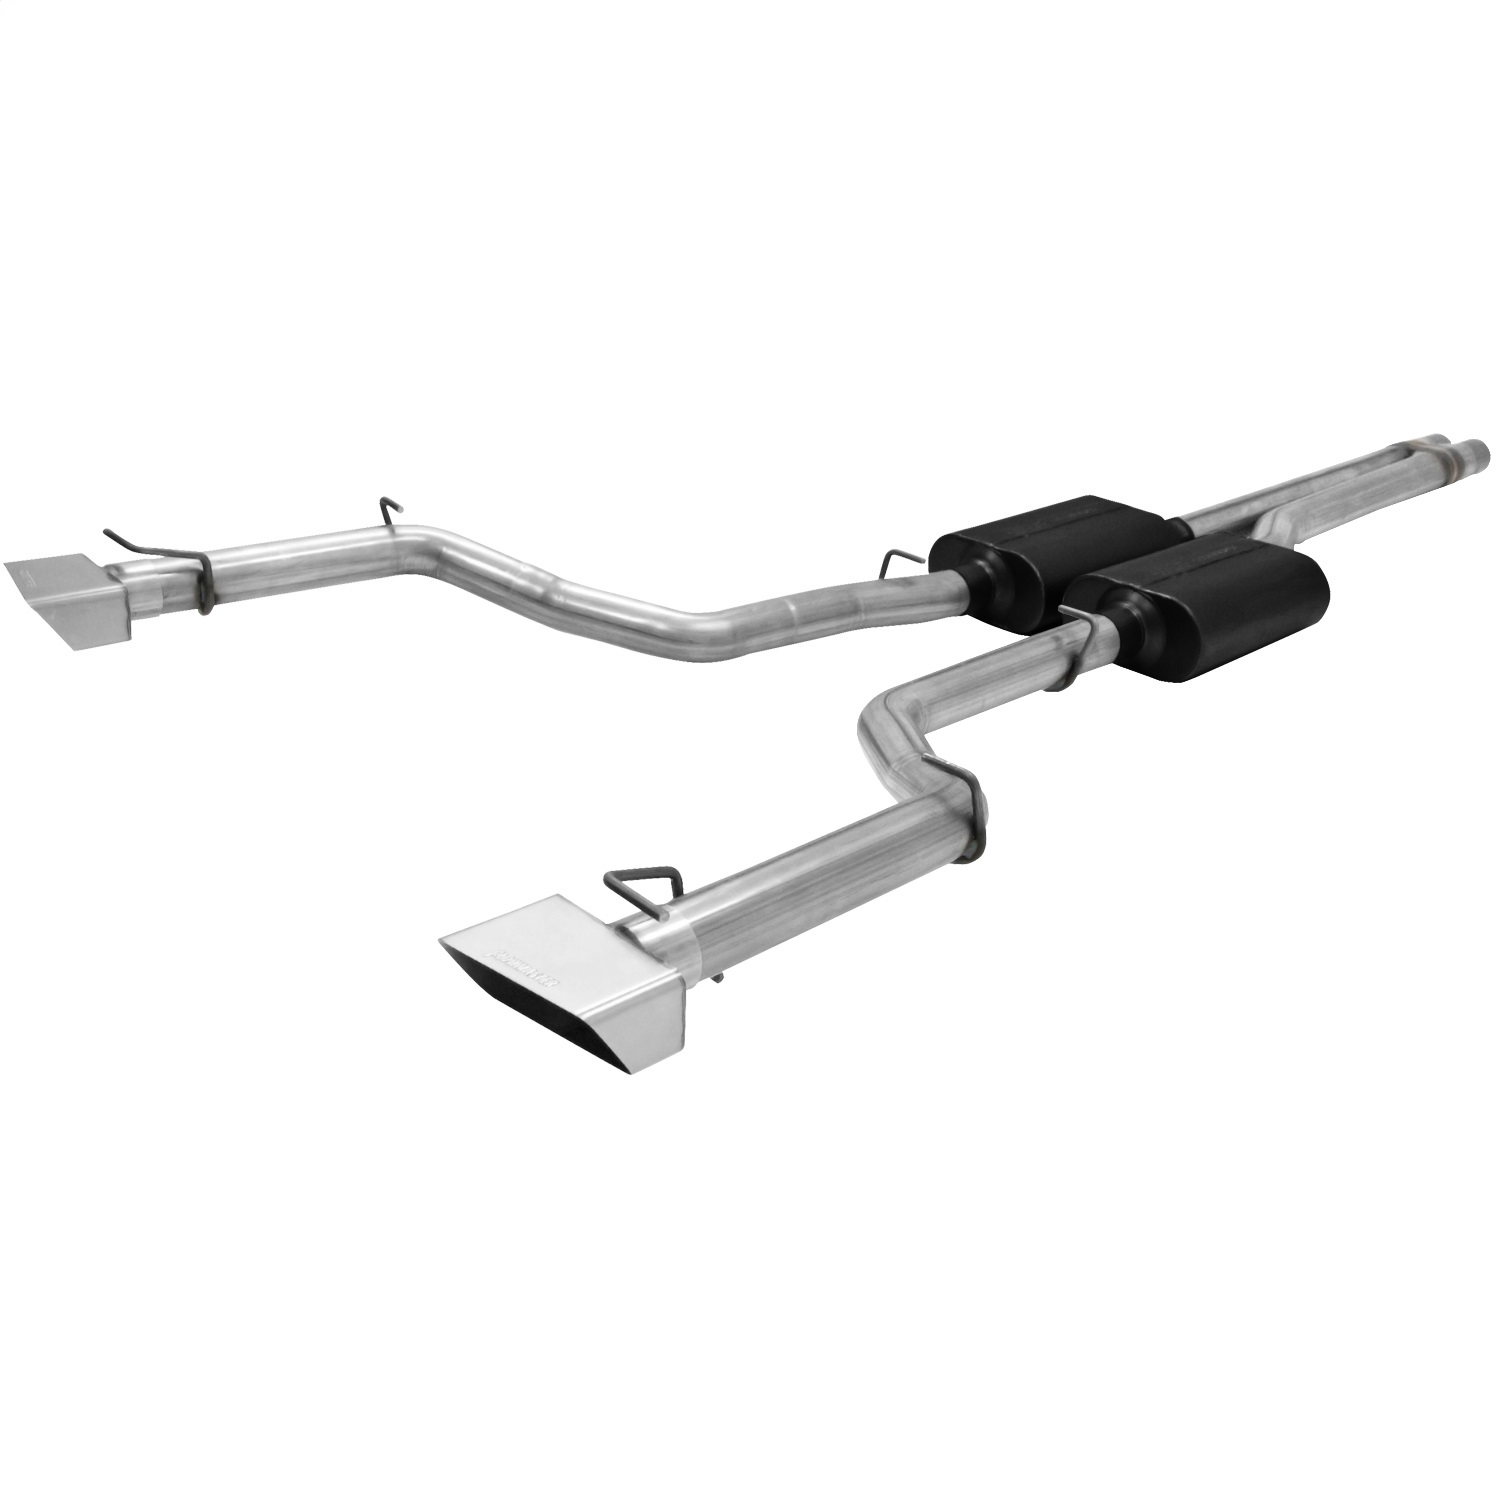 Flowmaster Flowmaster 817499 American Thunder Cat Back Exhaust System Fits 09-14 Challenger